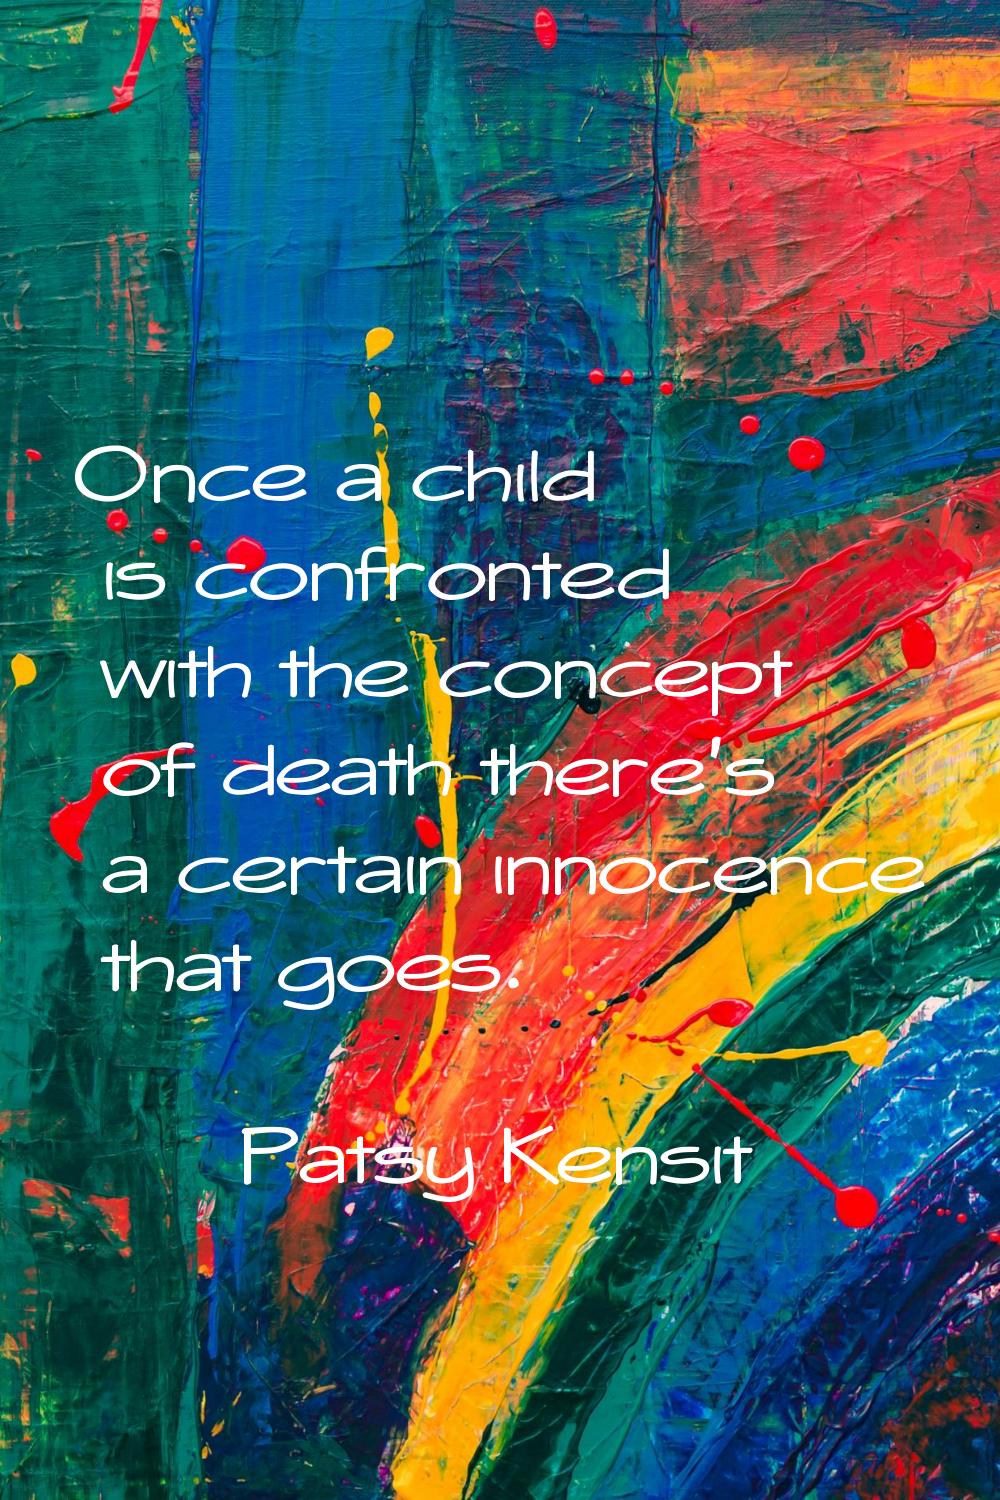 Once a child is confronted with the concept of death there's a certain innocence that goes.